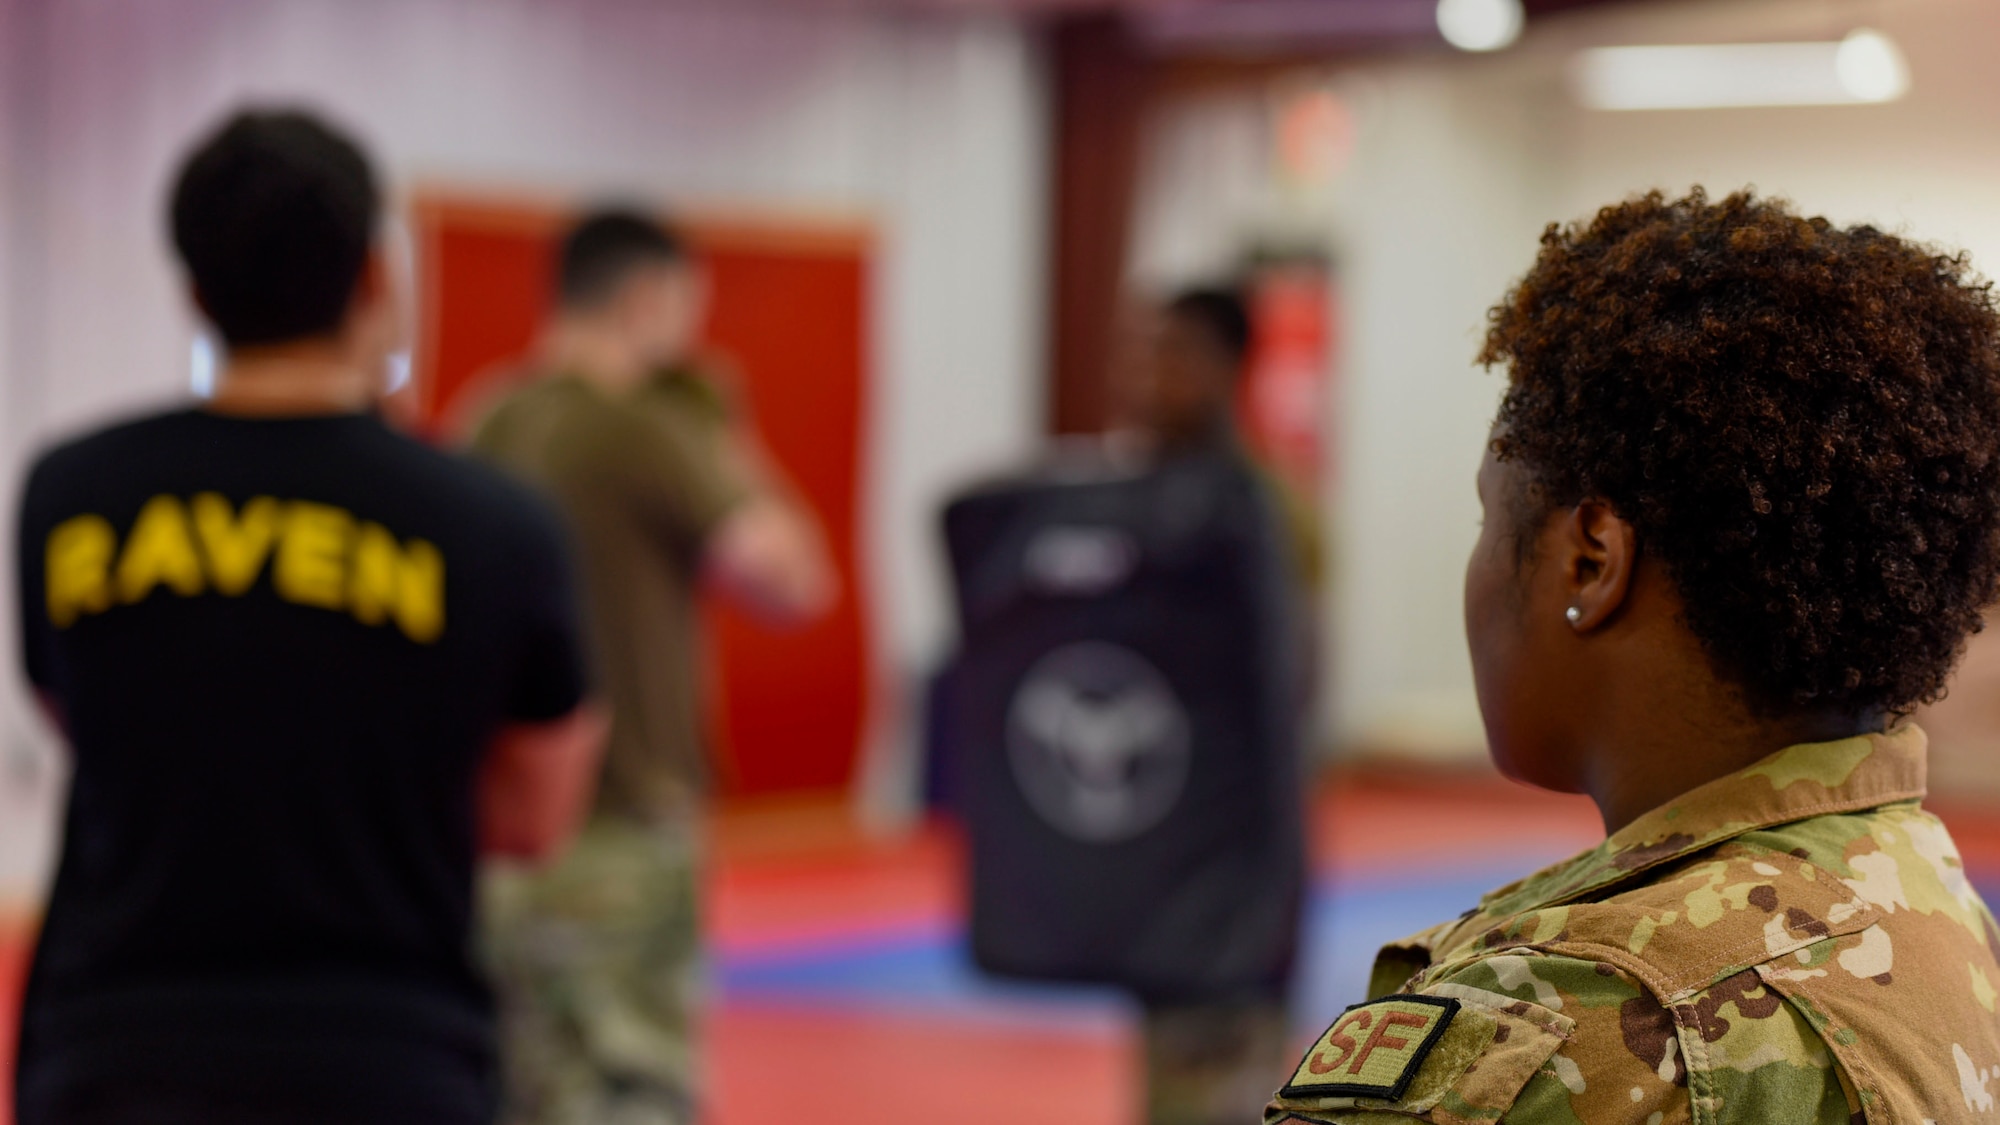 U.S. Air Force SrA Jamonica Smith, 87th Security Forces Squadron Raven Instructor, observes during baton drills during Raven Pre-requisite training at Joint Base McGuire-Dix-Lakehurst on July 13, 2021.